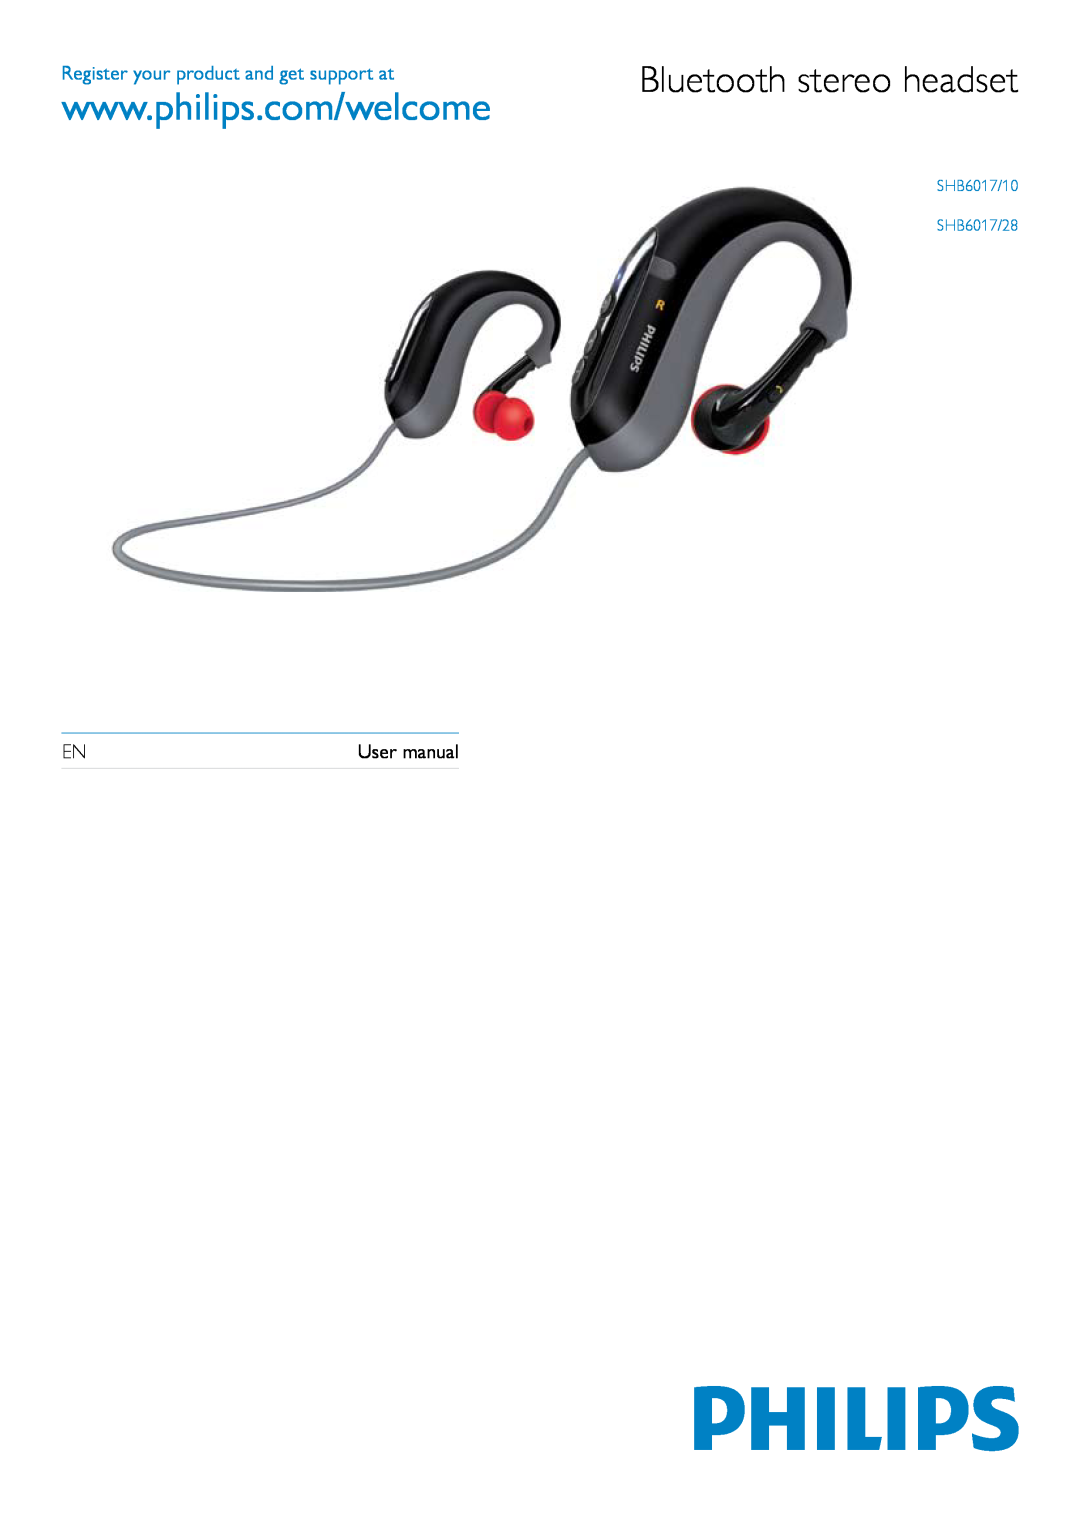 Philips SHB6017/28 user manual Register your product and get support at, User manual, Bluetooth stereo headset, SHB6017/10 